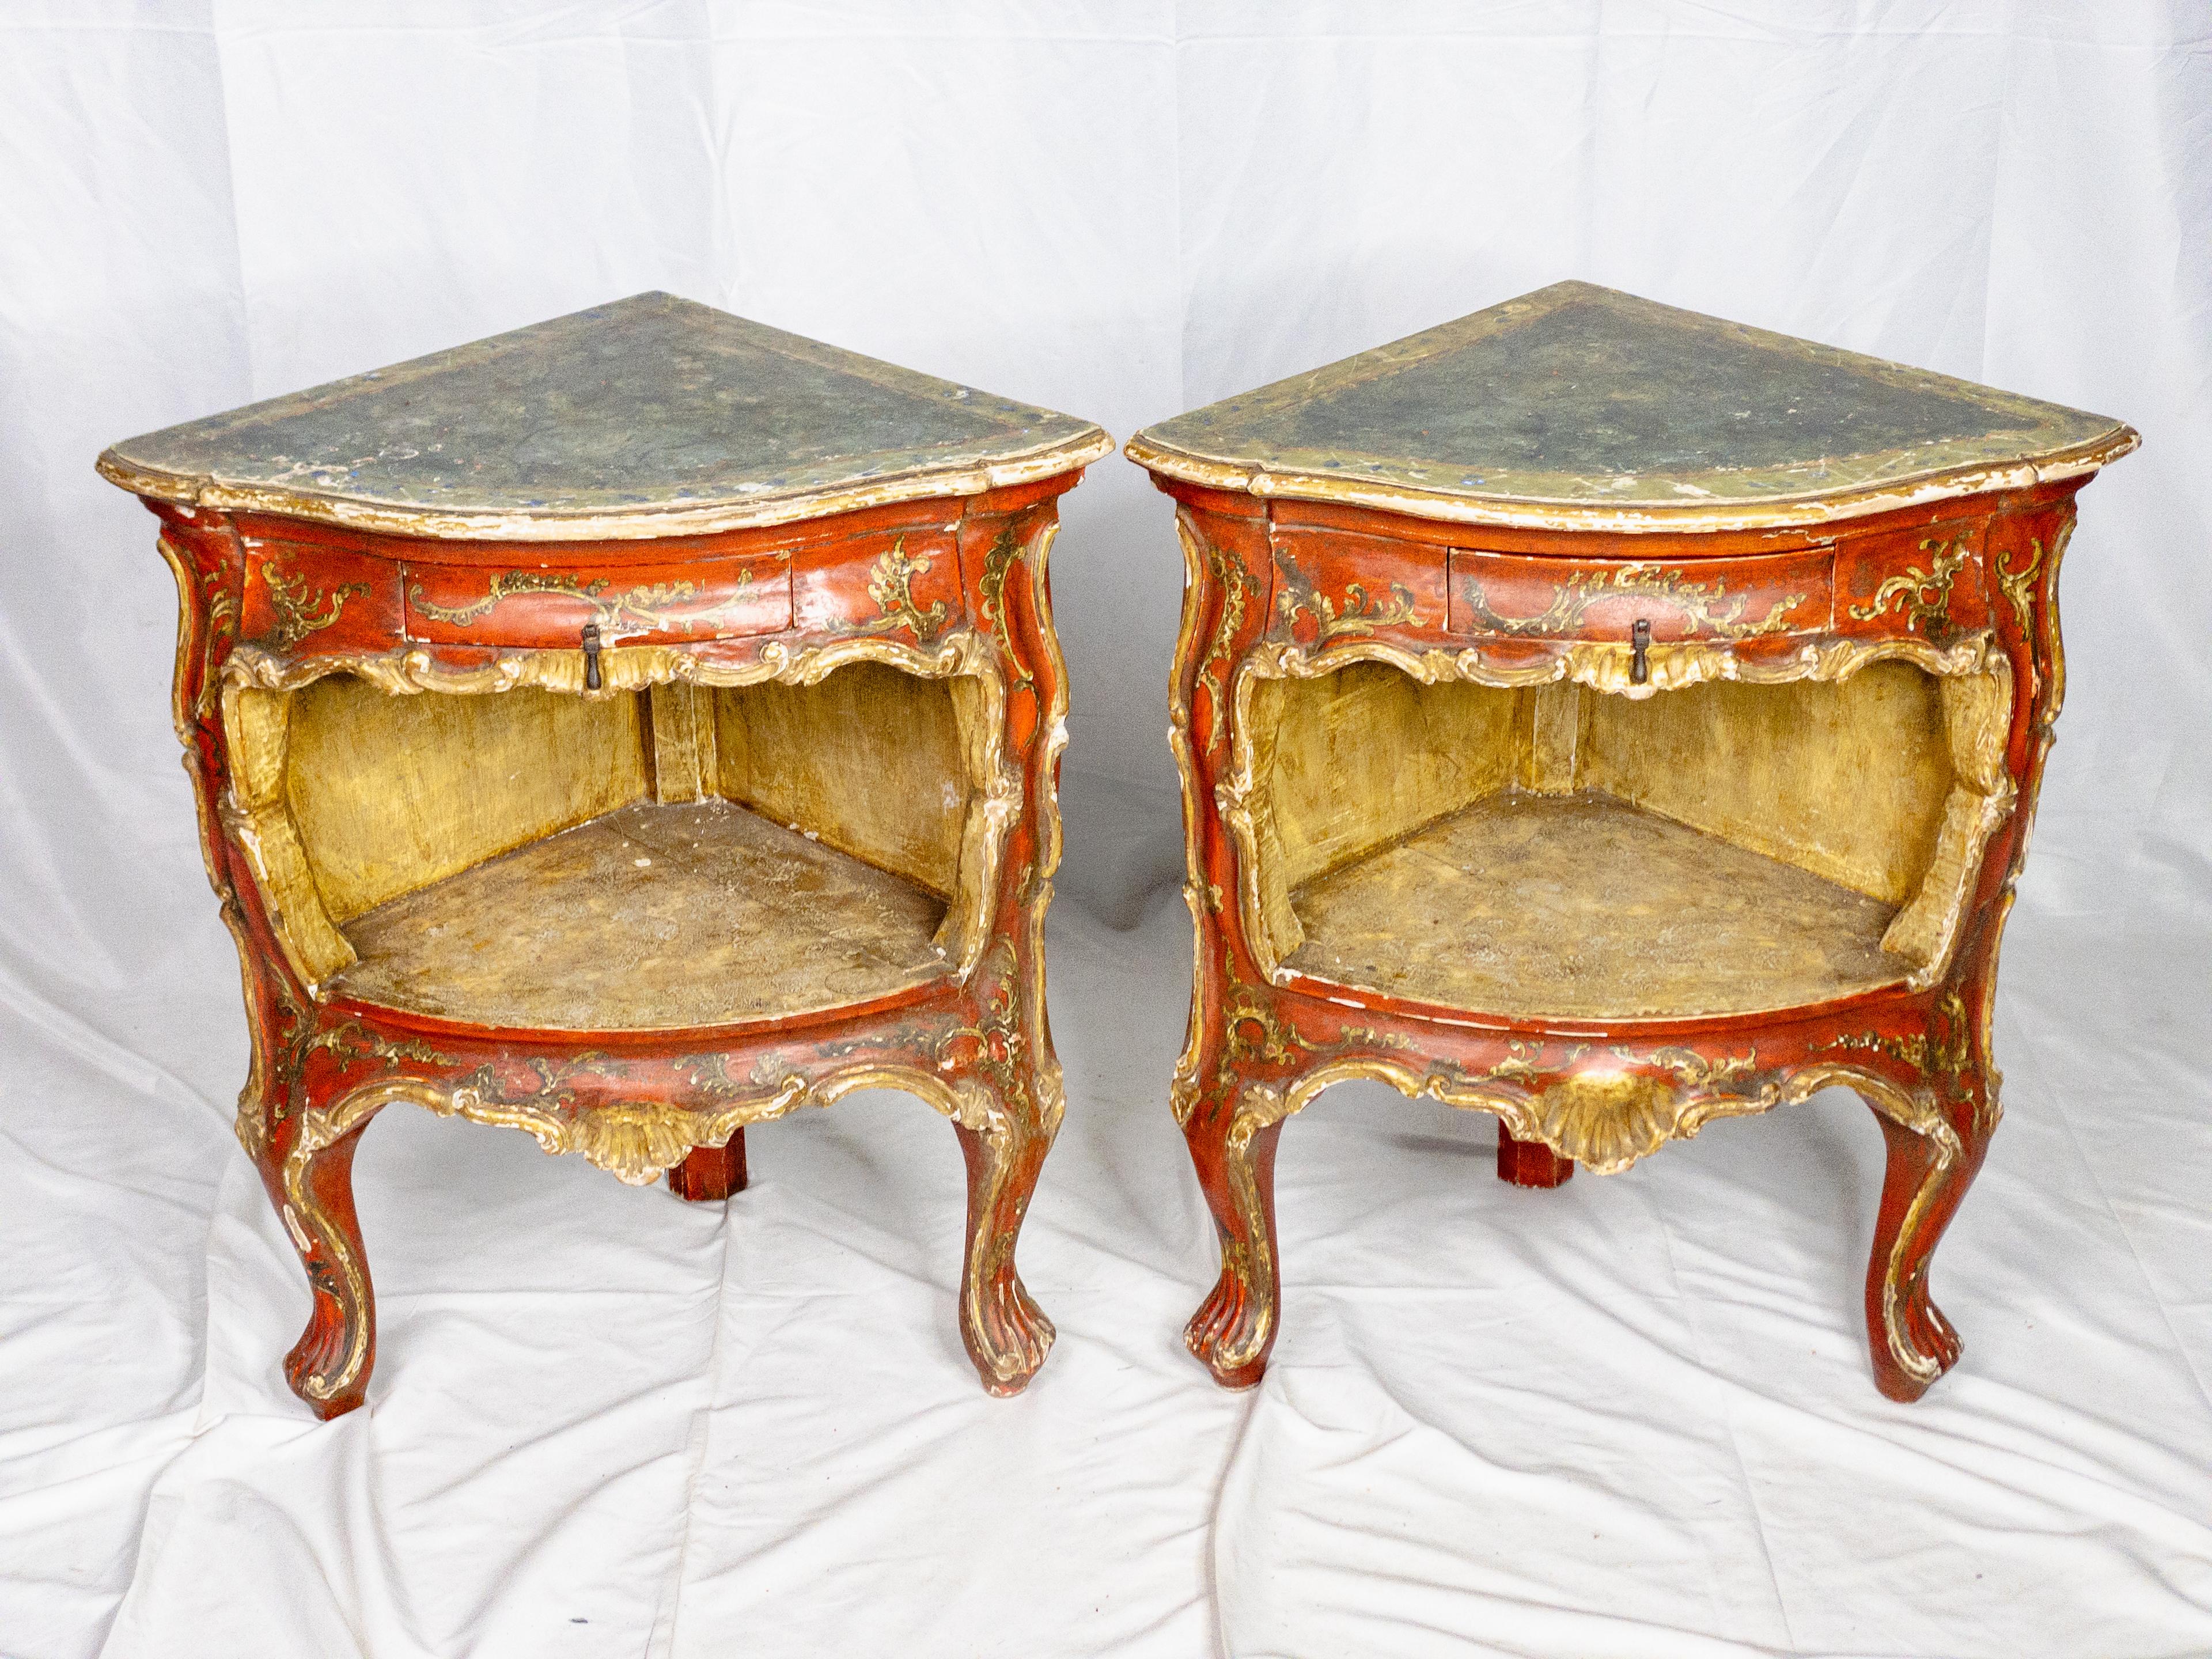 This exquisite pair of 19th-century Italian painted chests showcases exceptional craftsmanship and timeless elegance. The vibrant red hue, adorned with meticulously carved gilt details, exudes opulence and sophistication. The green painted tops add